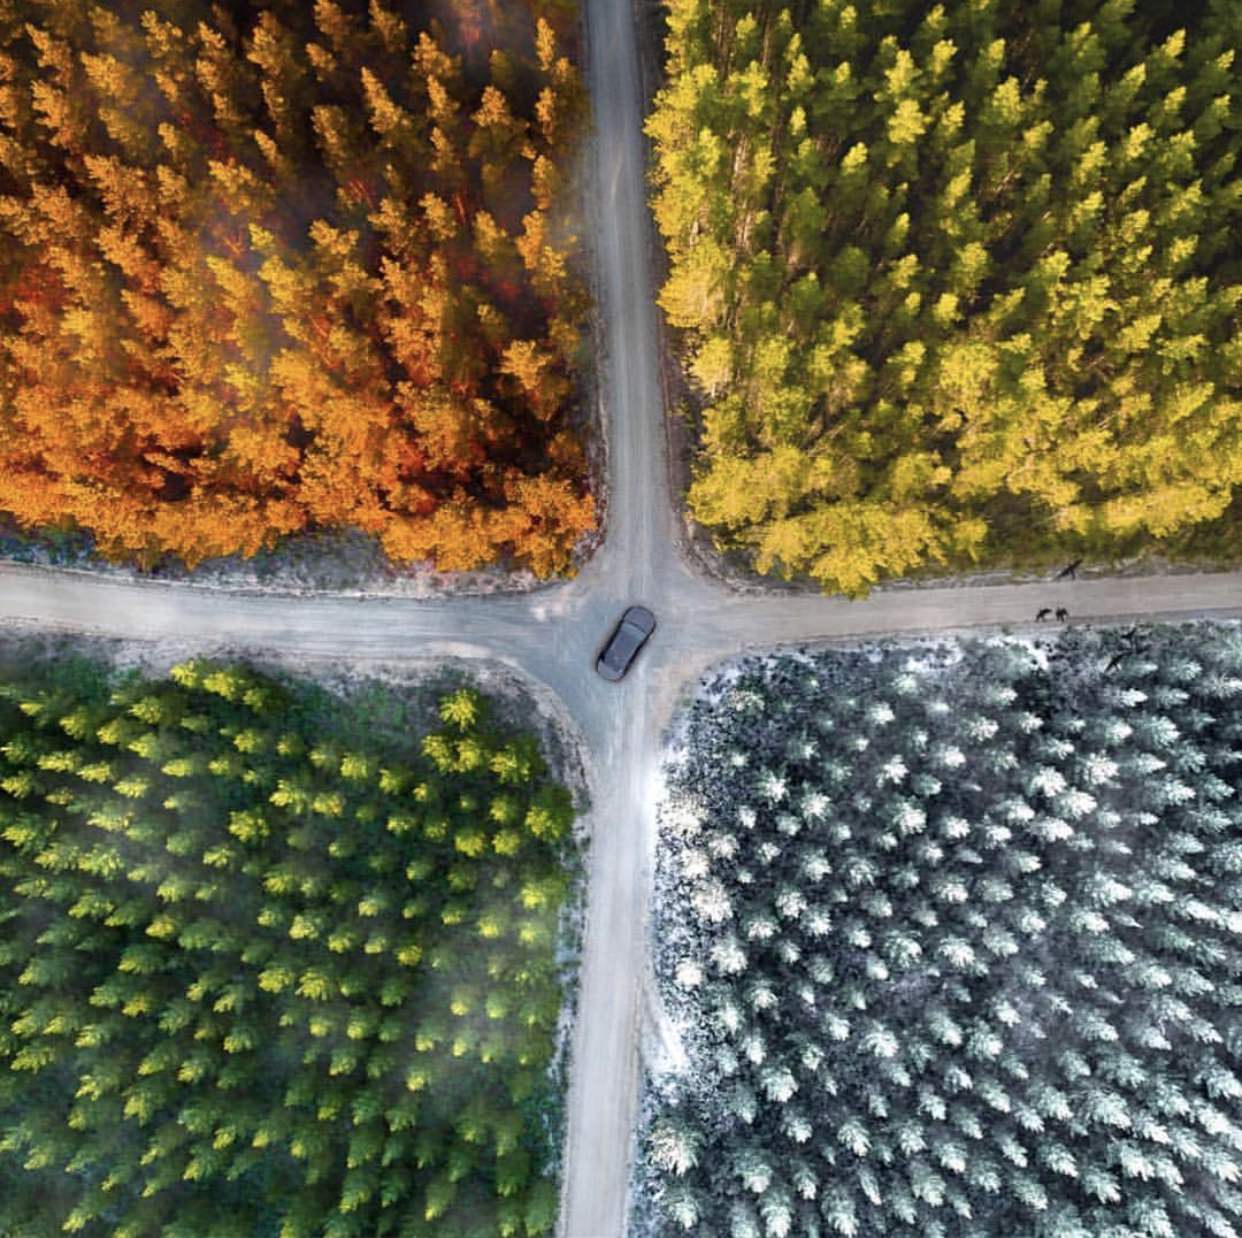 Danny is an Australian-born drone pilot who works at the Mall advertising agency. His talent was first recognized by the legendary photographer Demas Rusli, who himself captured a similar photo. Using a Mavic Pro, he captured this image of an intersection in Penrose Park. The image is in RAW format and with the help of Photoshop, seasons and layers of other objects and clouds have been added to it. The result is a visualization of 4 seasons in one day.